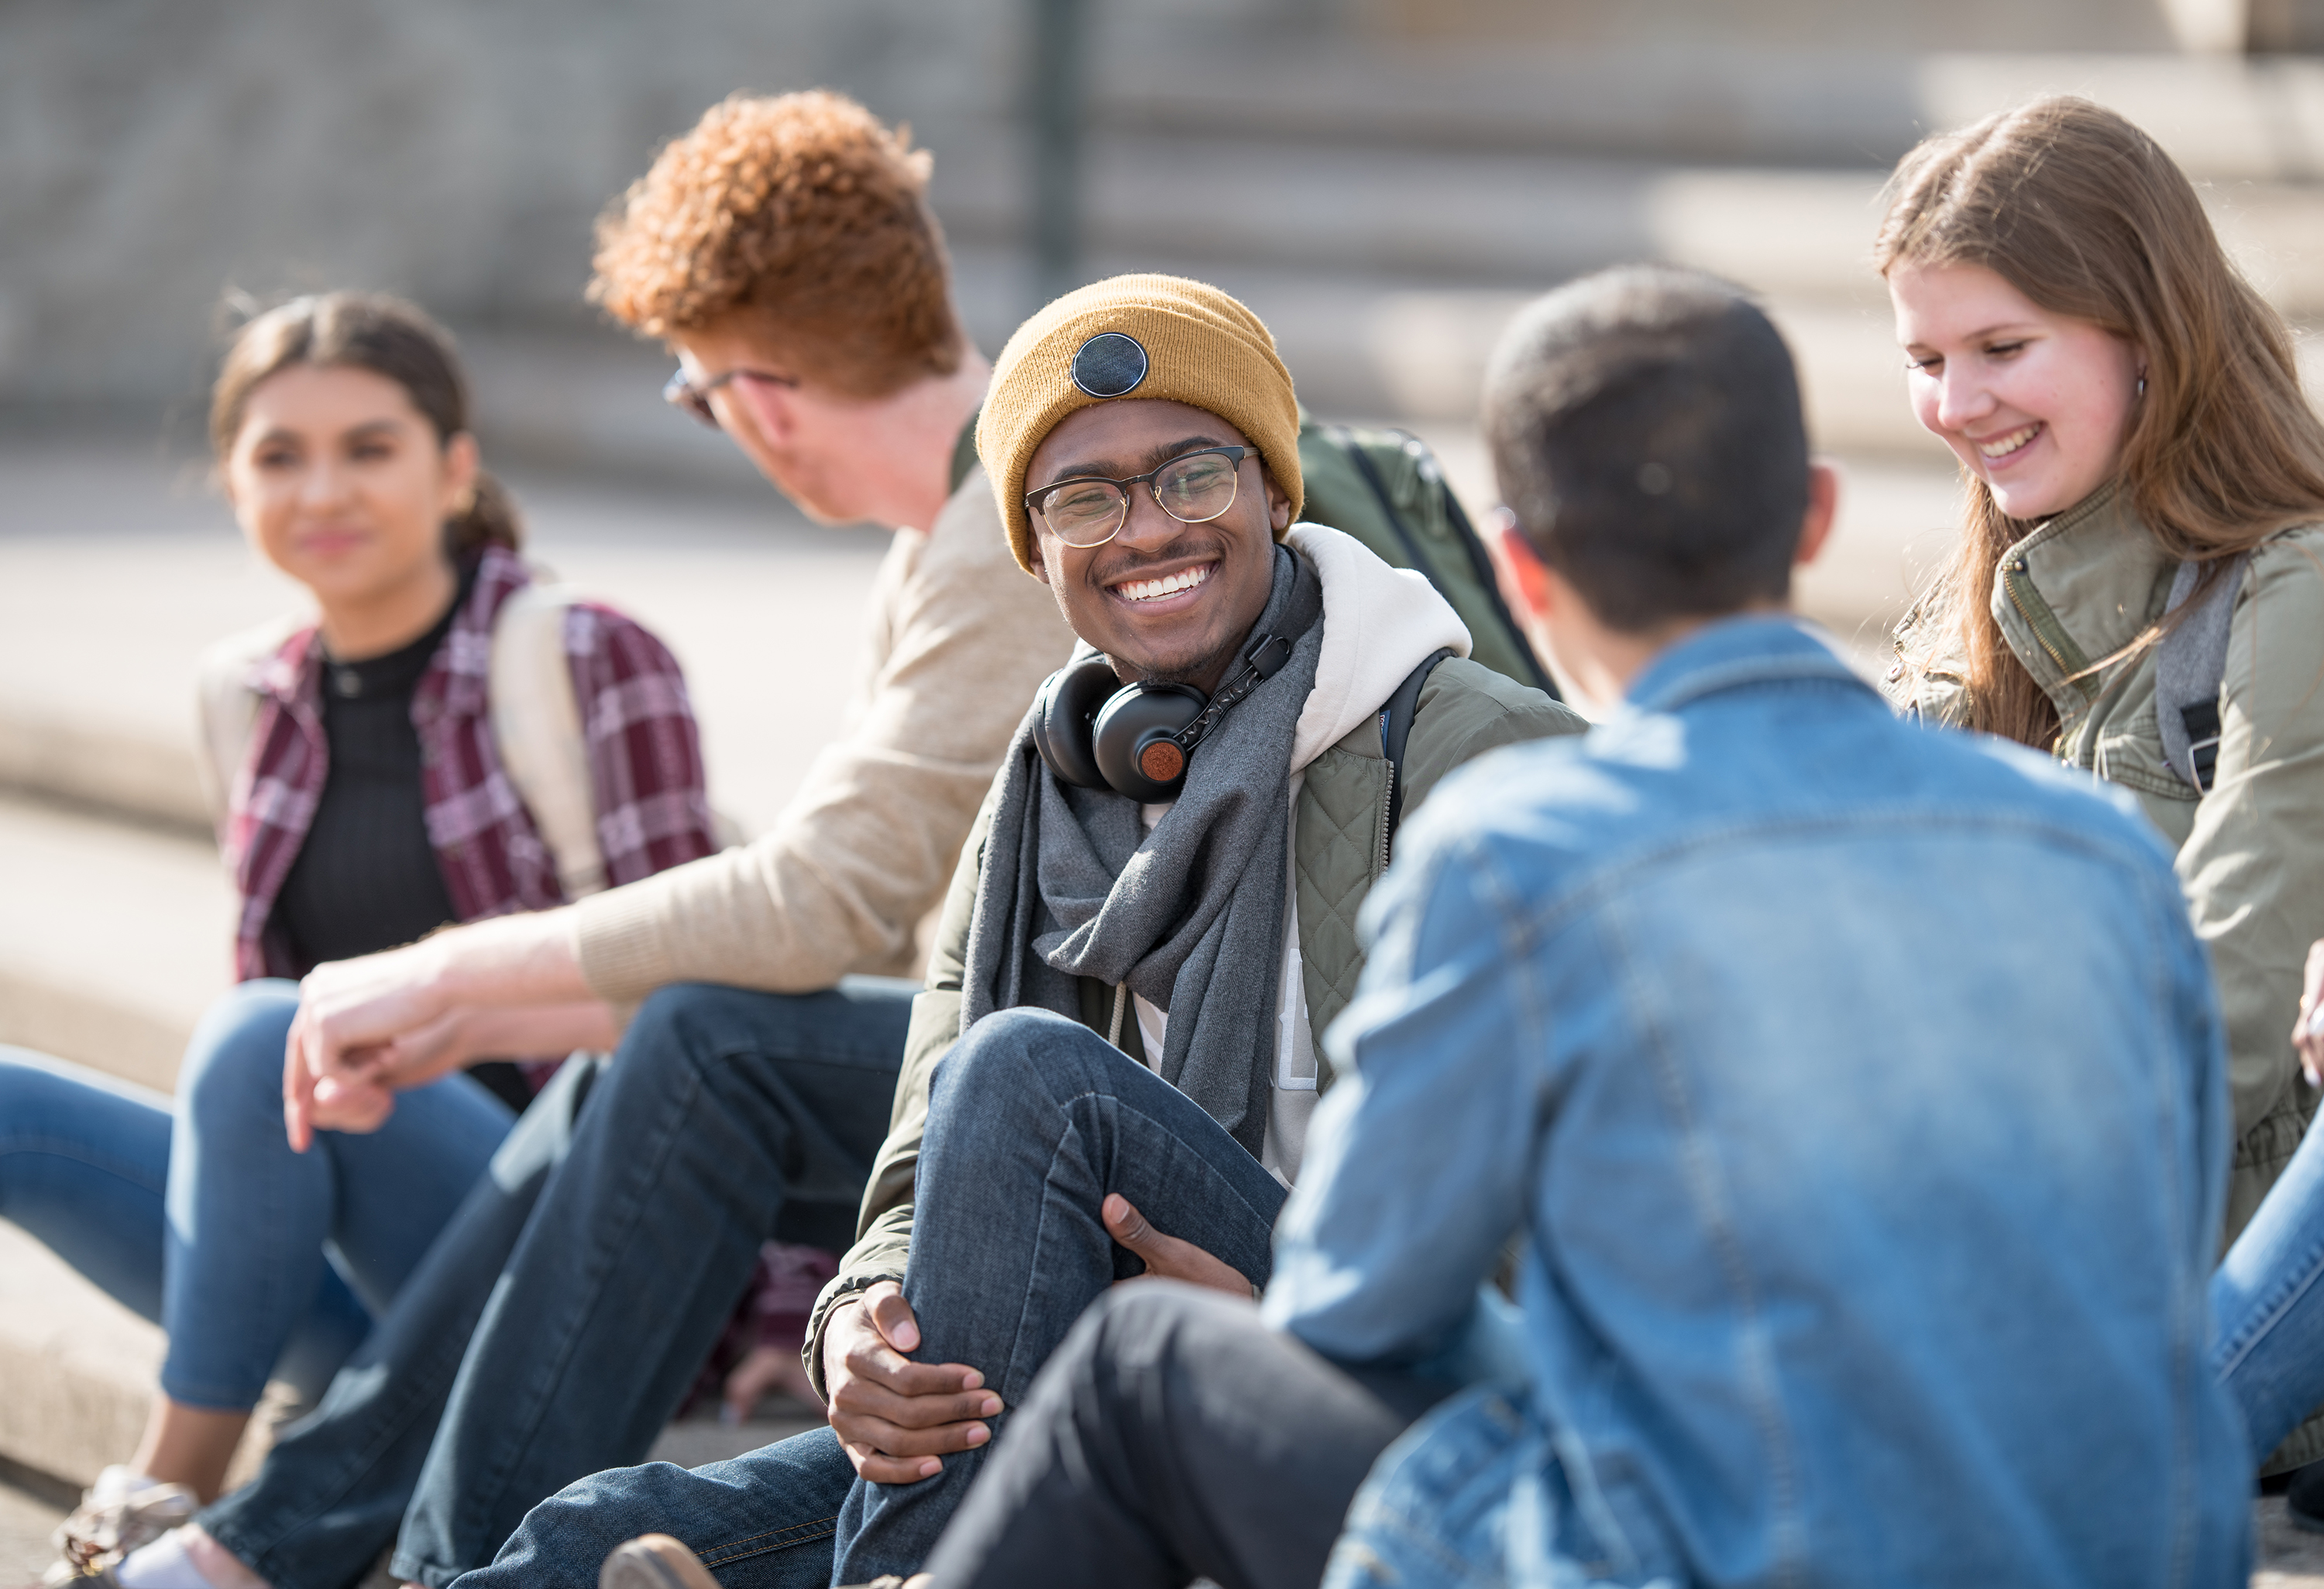 A group of students sit outside on stone steps, smiling and laughing.